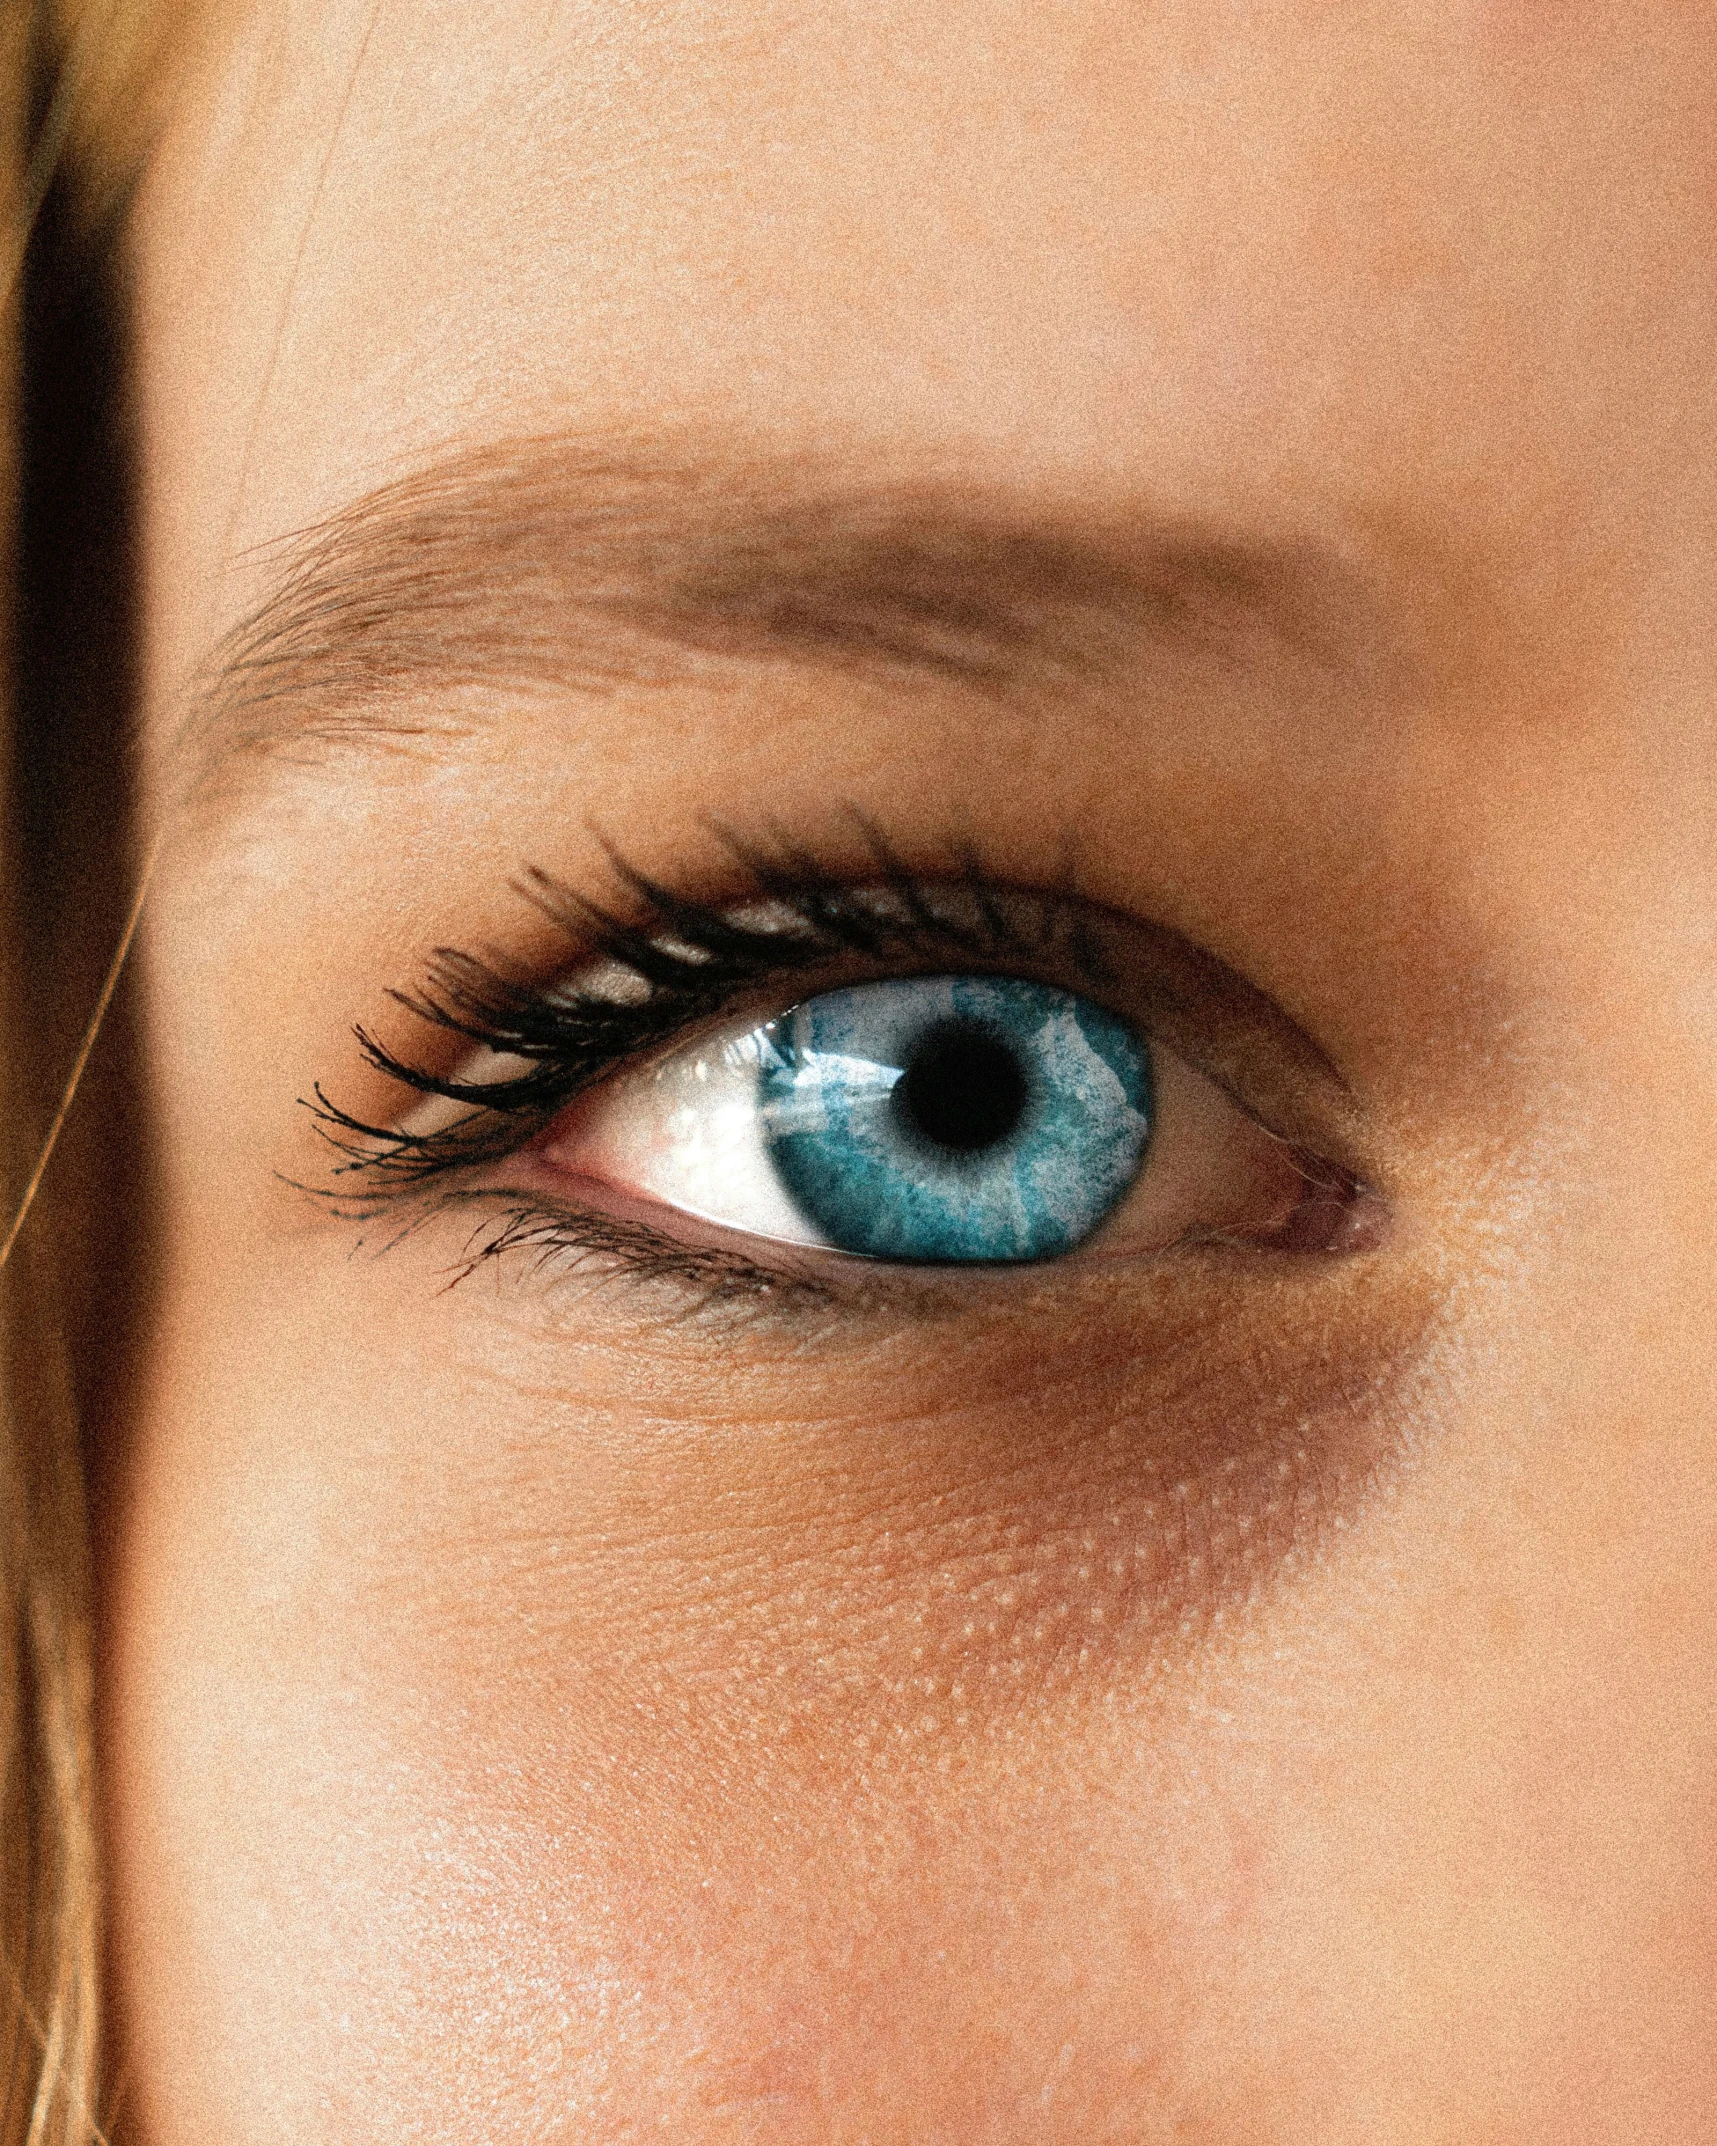 woman with large blue eye looking up at camera